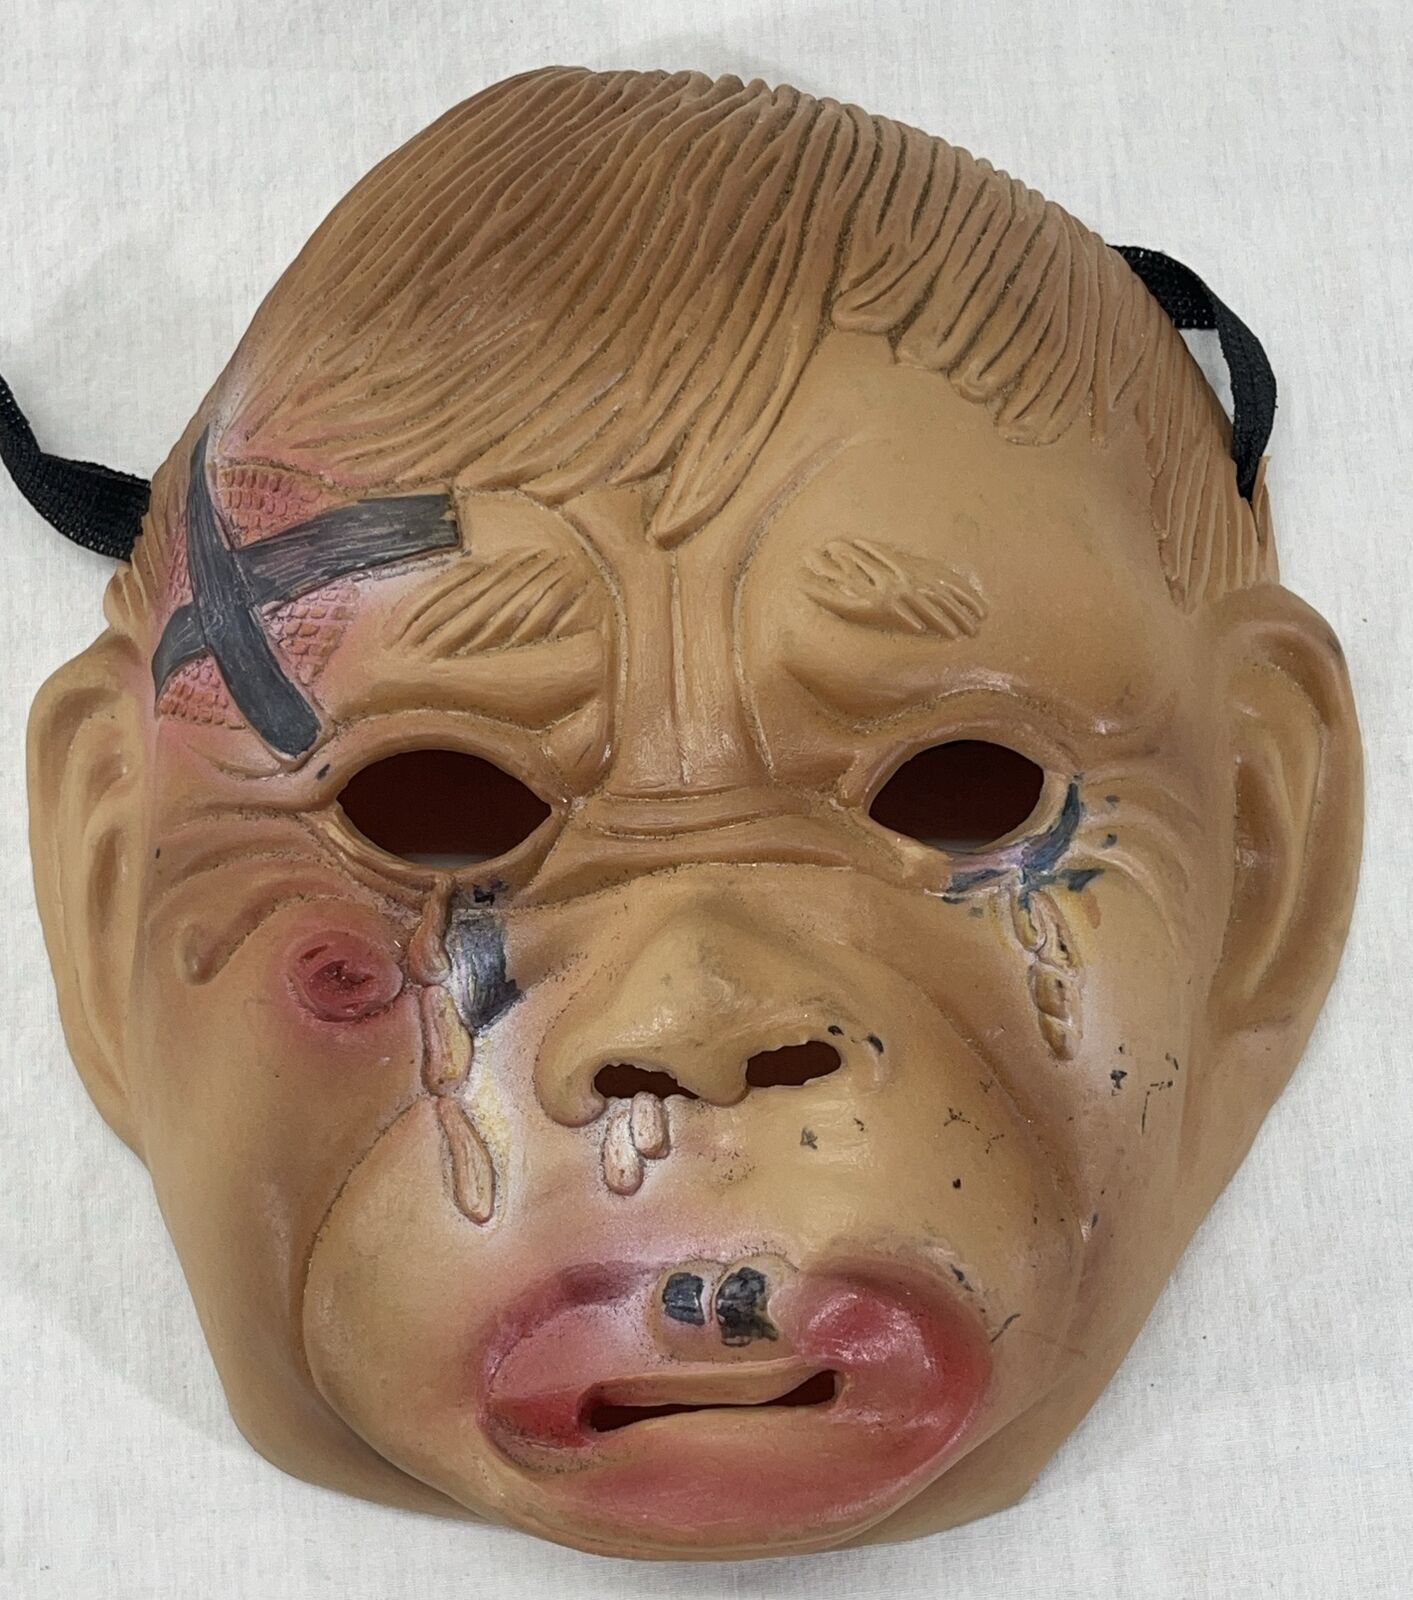 Vintage Rubber Monkey Halloween Mask Scary with Elastic Head Strap